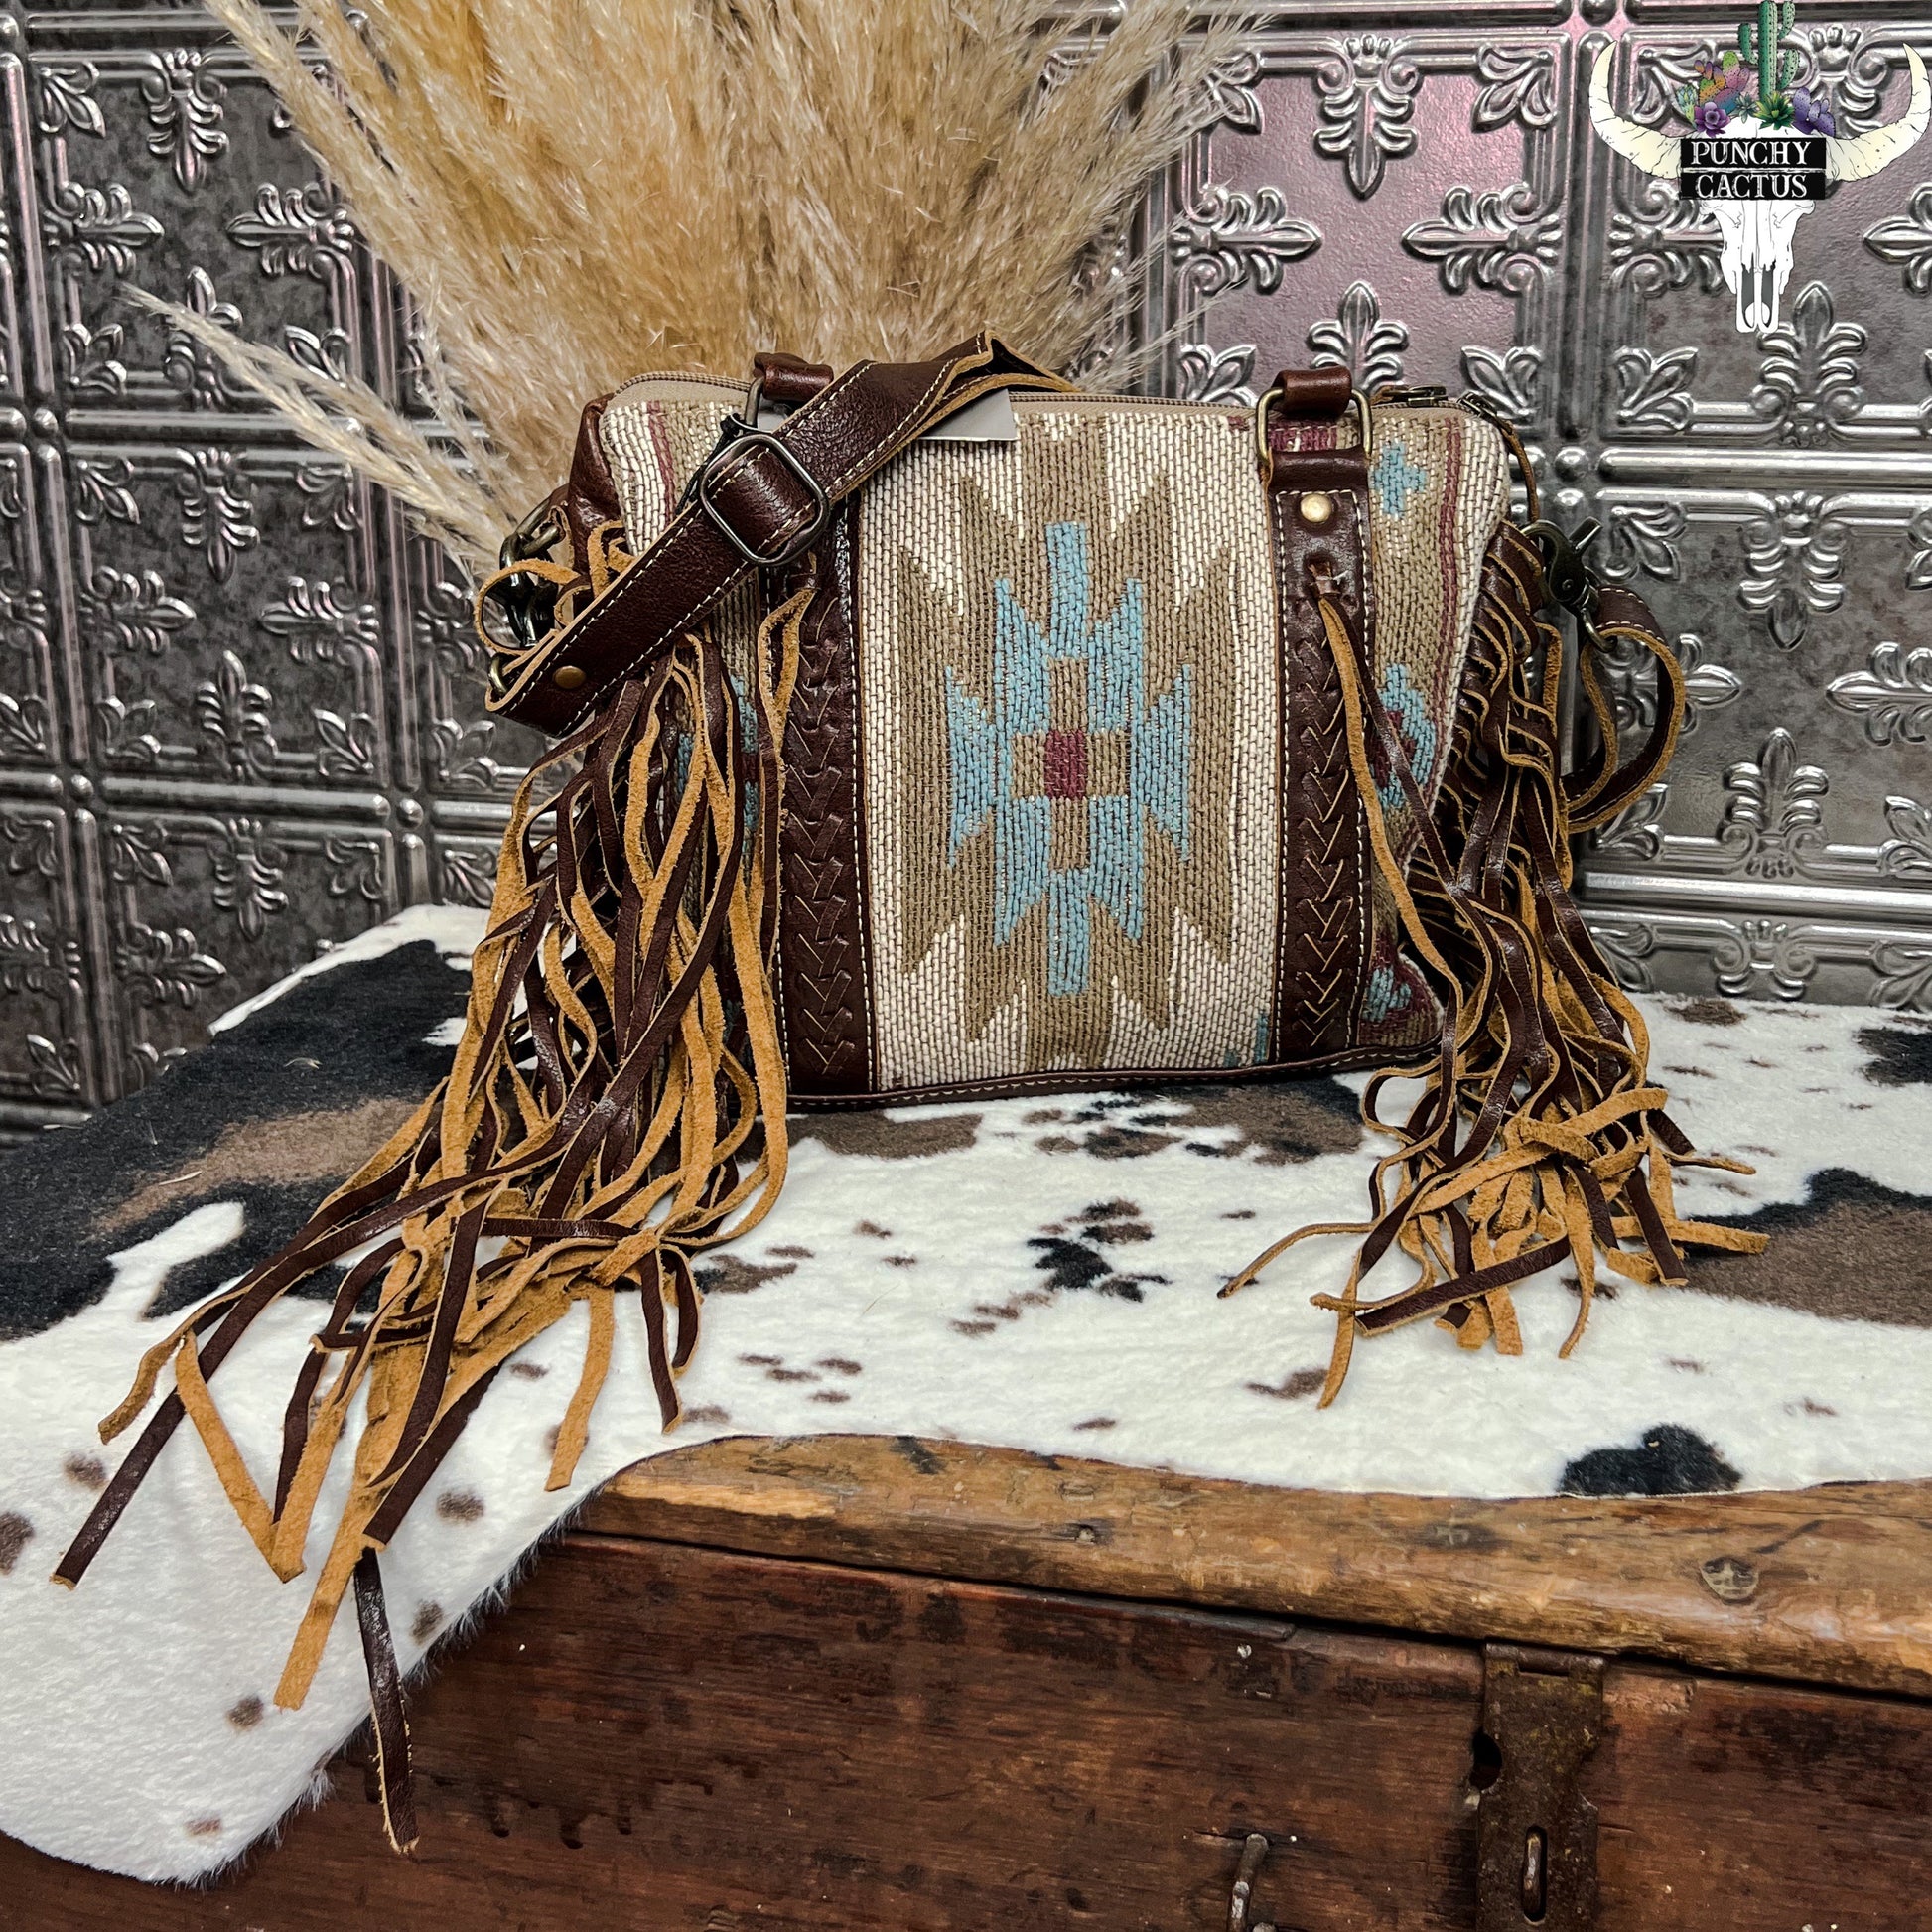 WESTERN LEATHER BAG With Turquoise Stone Real Cowhide Purse 